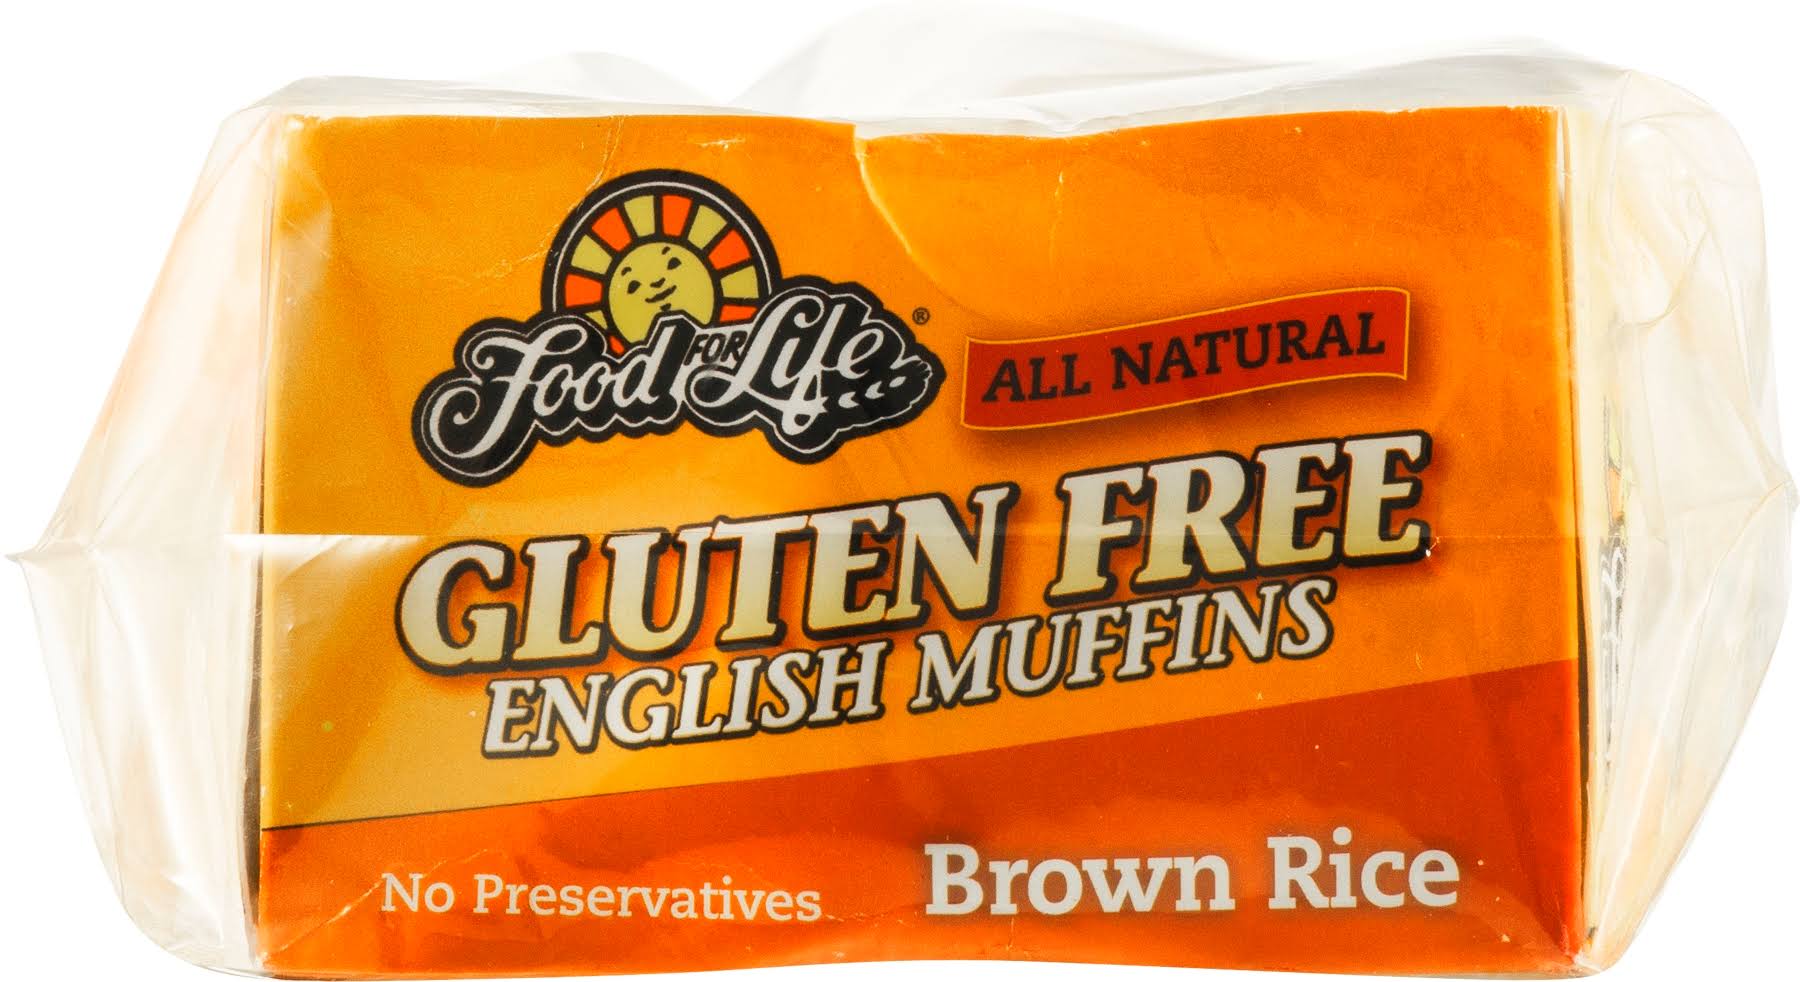 Food for Life English Muffins, Gluten Free, Brown Rice